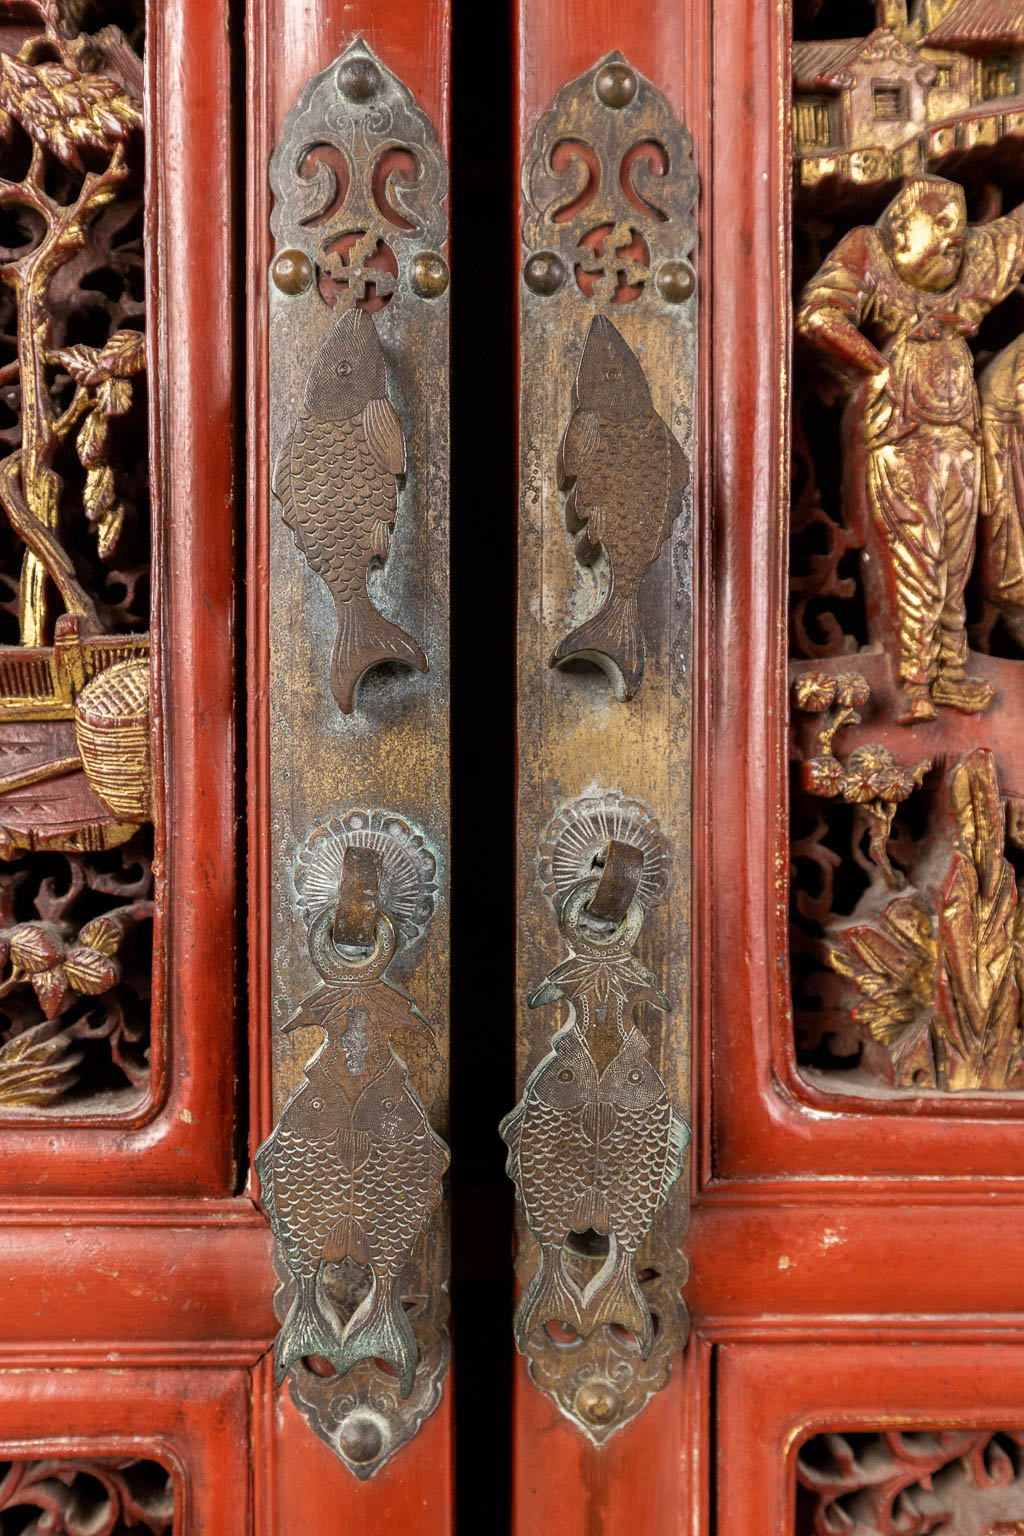 A Chinese cabinet with finely sculptured lacquered and gilt wood panels, 19th/20th C. (D:47 x W:73 x H:173 cm)